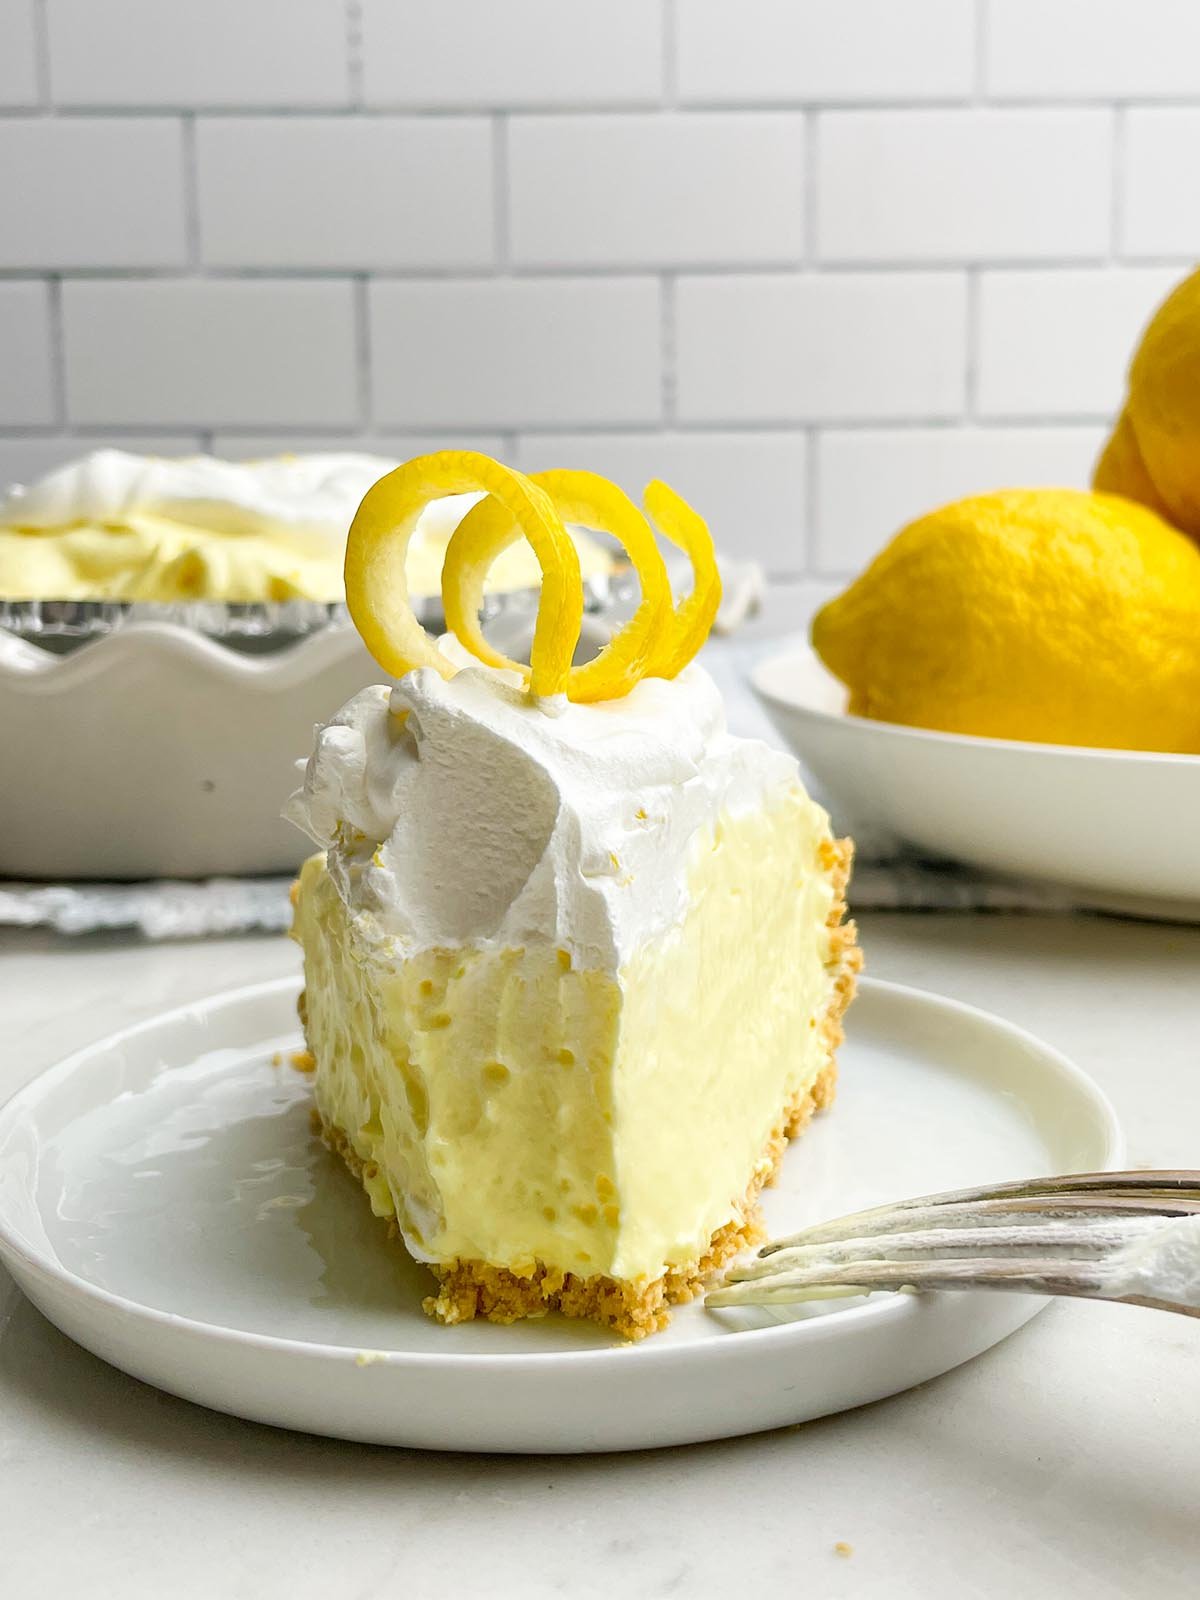 piece of Lemon jello pie on a white plate with a fork resting on it.